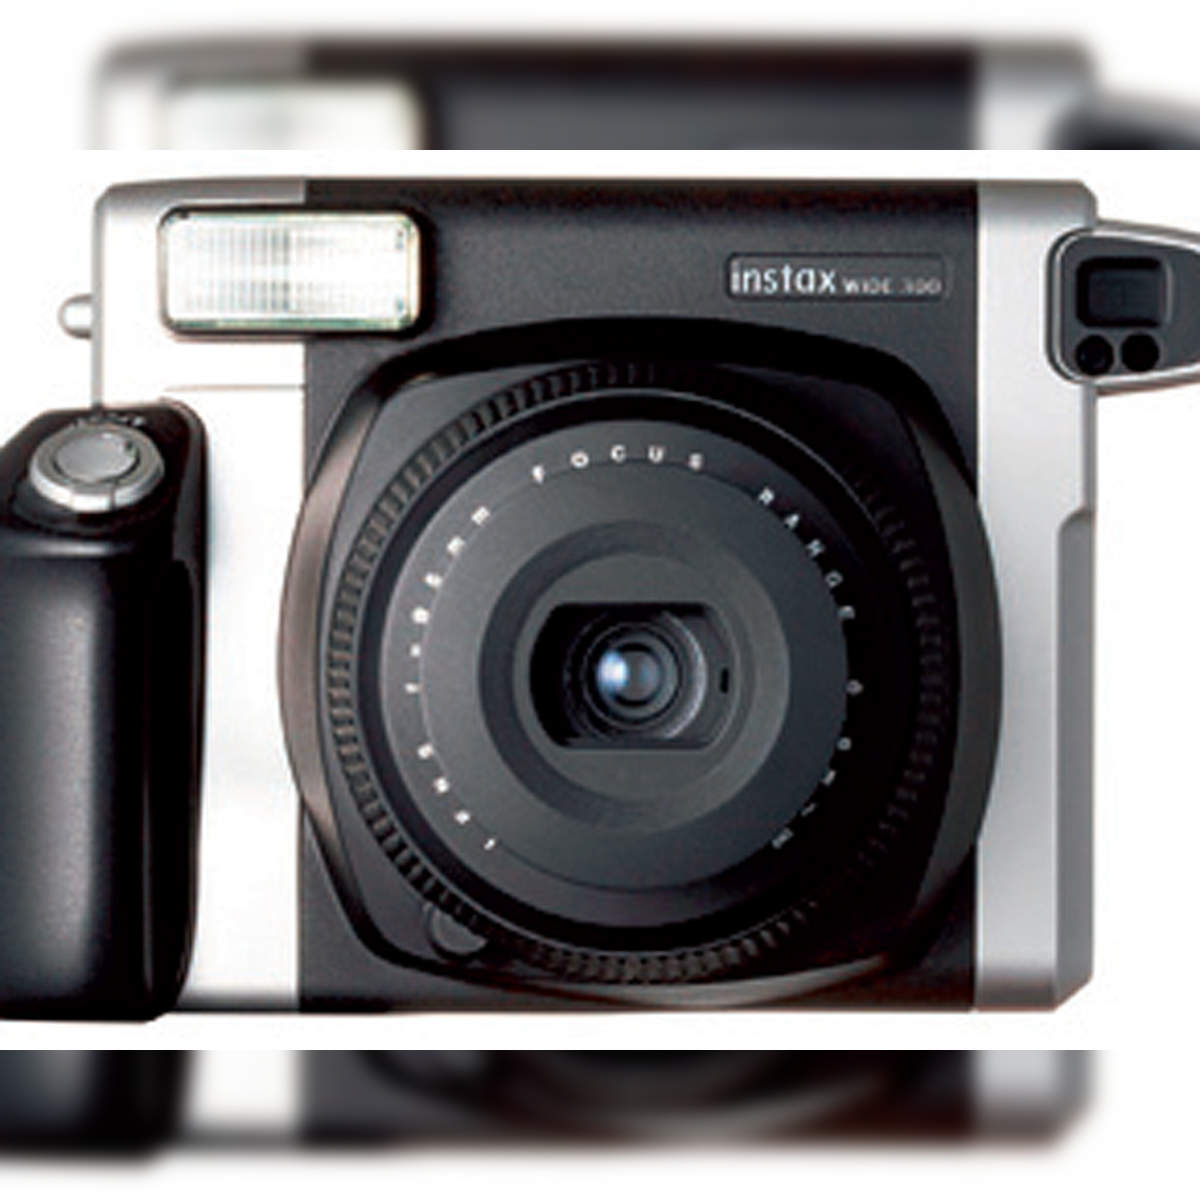 I want a new Fujifilm Instax Wide 300! Come on, where's the next camera?